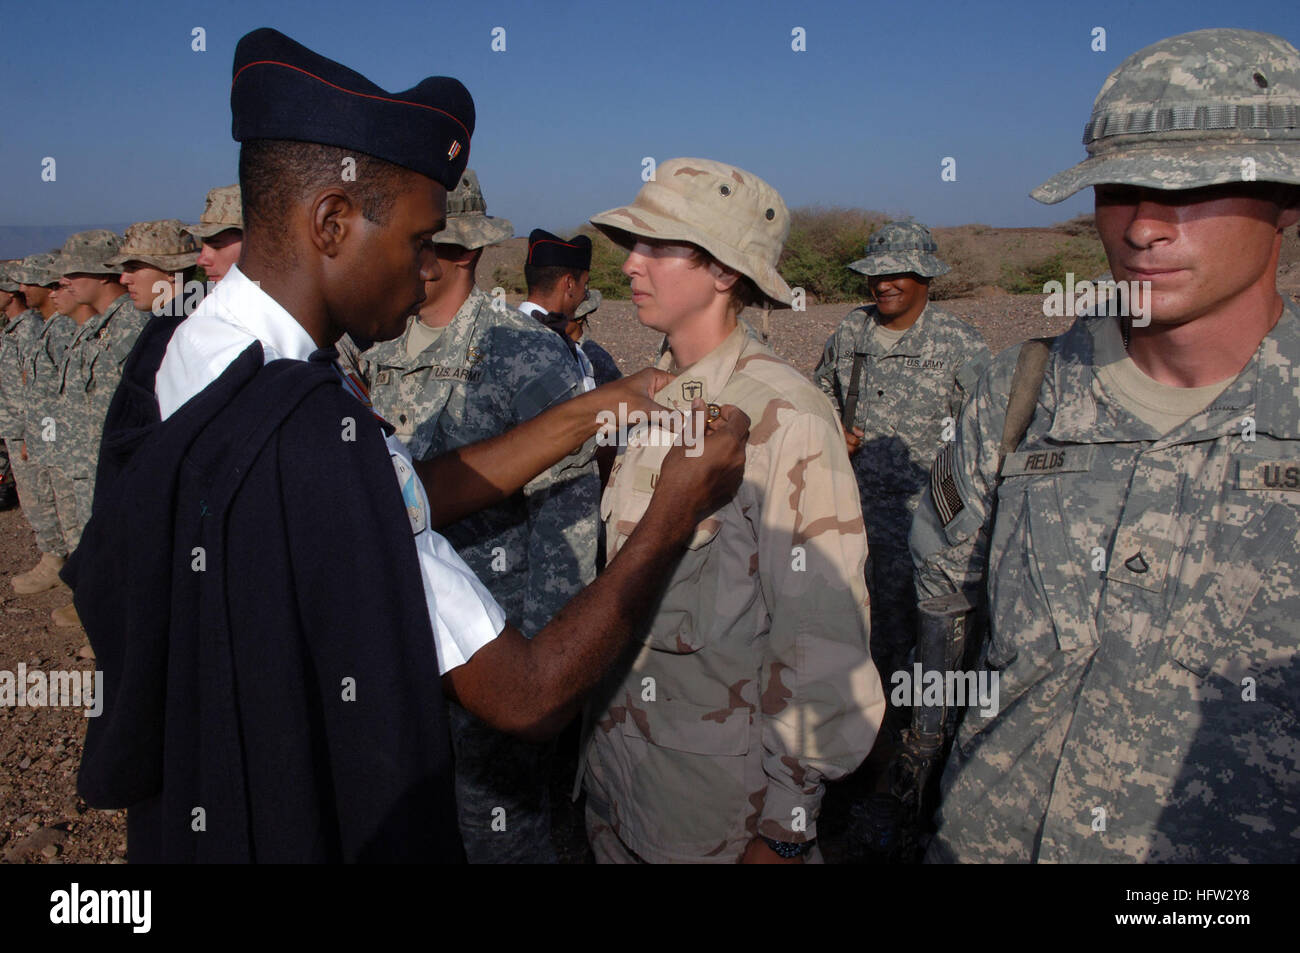 071113-N-3931M-030 SIDA, Djibouti (Nov. 13, 2007)  An instructor from the French military pins a survival badge on U.S. Navy Hospital Corpsman 3rd Class Gwendolyn Collver, assigned to Combined Joint Task Force-Horn of Africa, upon completion of a desert survival course conducted by the French military. The training consisted of class instruction on land navigation, using global positioning systems, cooking and eating to survive, how to use camels to transport equipment, helicopter medical evacuations, how to start a fire, and techniques for rigging traps. U.S. Navy photo by Mass Communication  Stock Photo